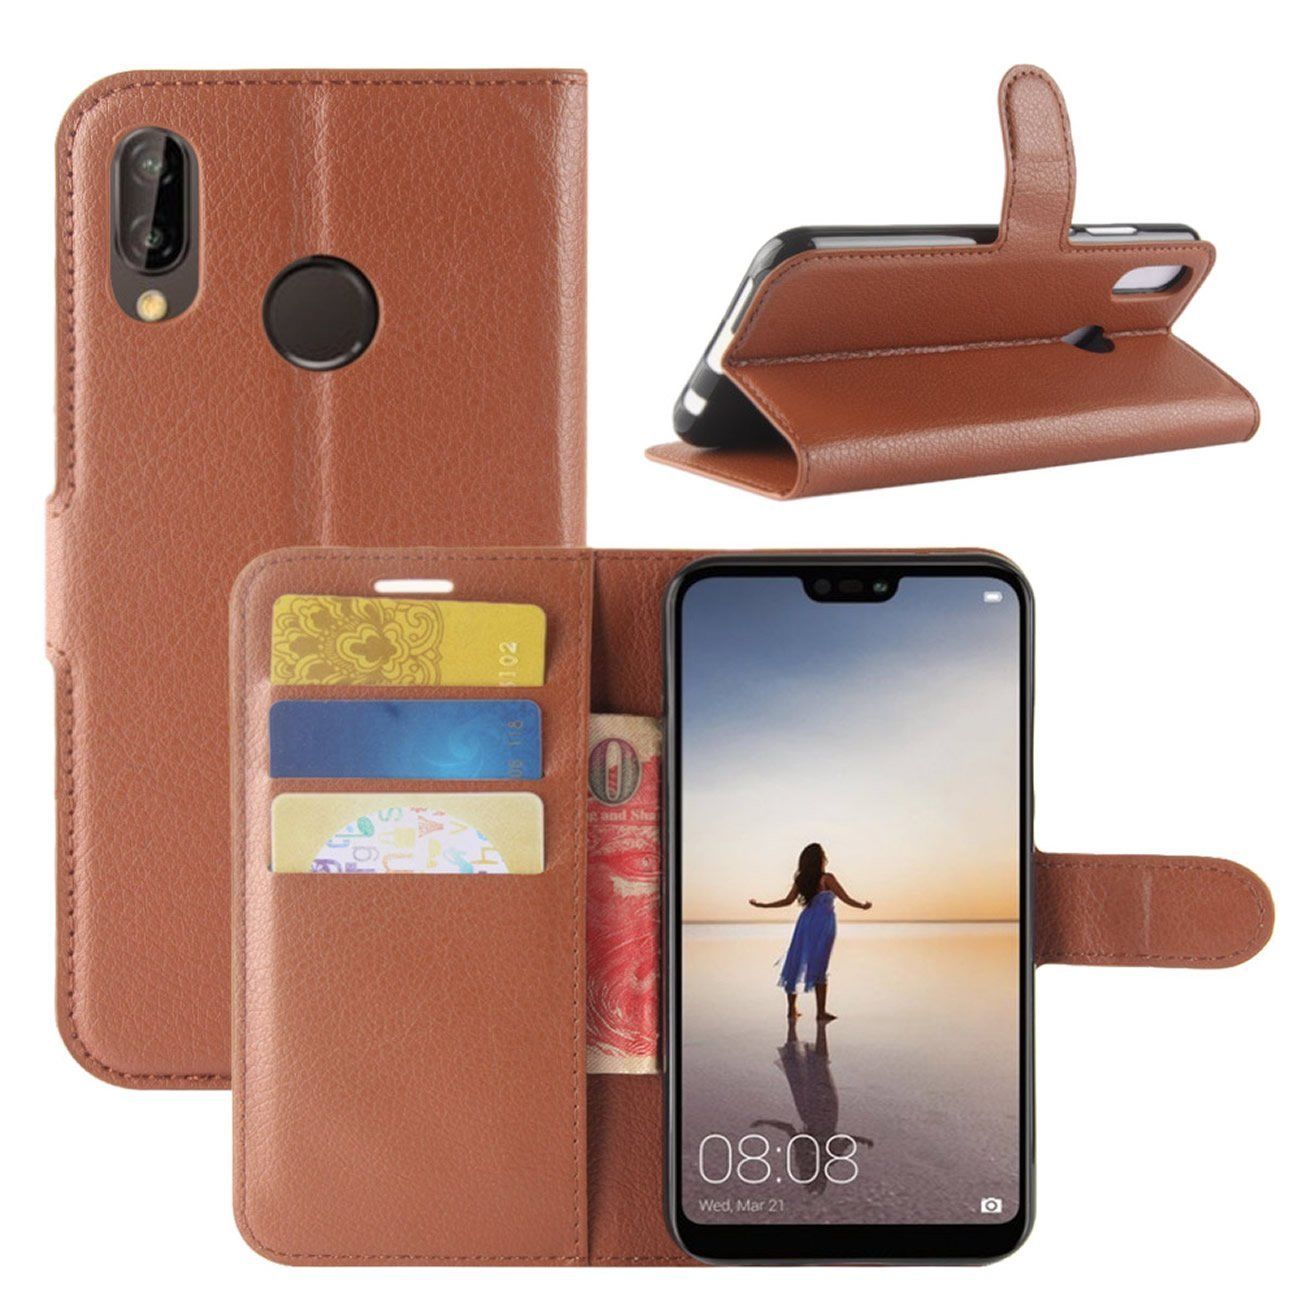 New Premium Leather Wallet Case TPU Cover For HUAWEI Nova 3i-Brown